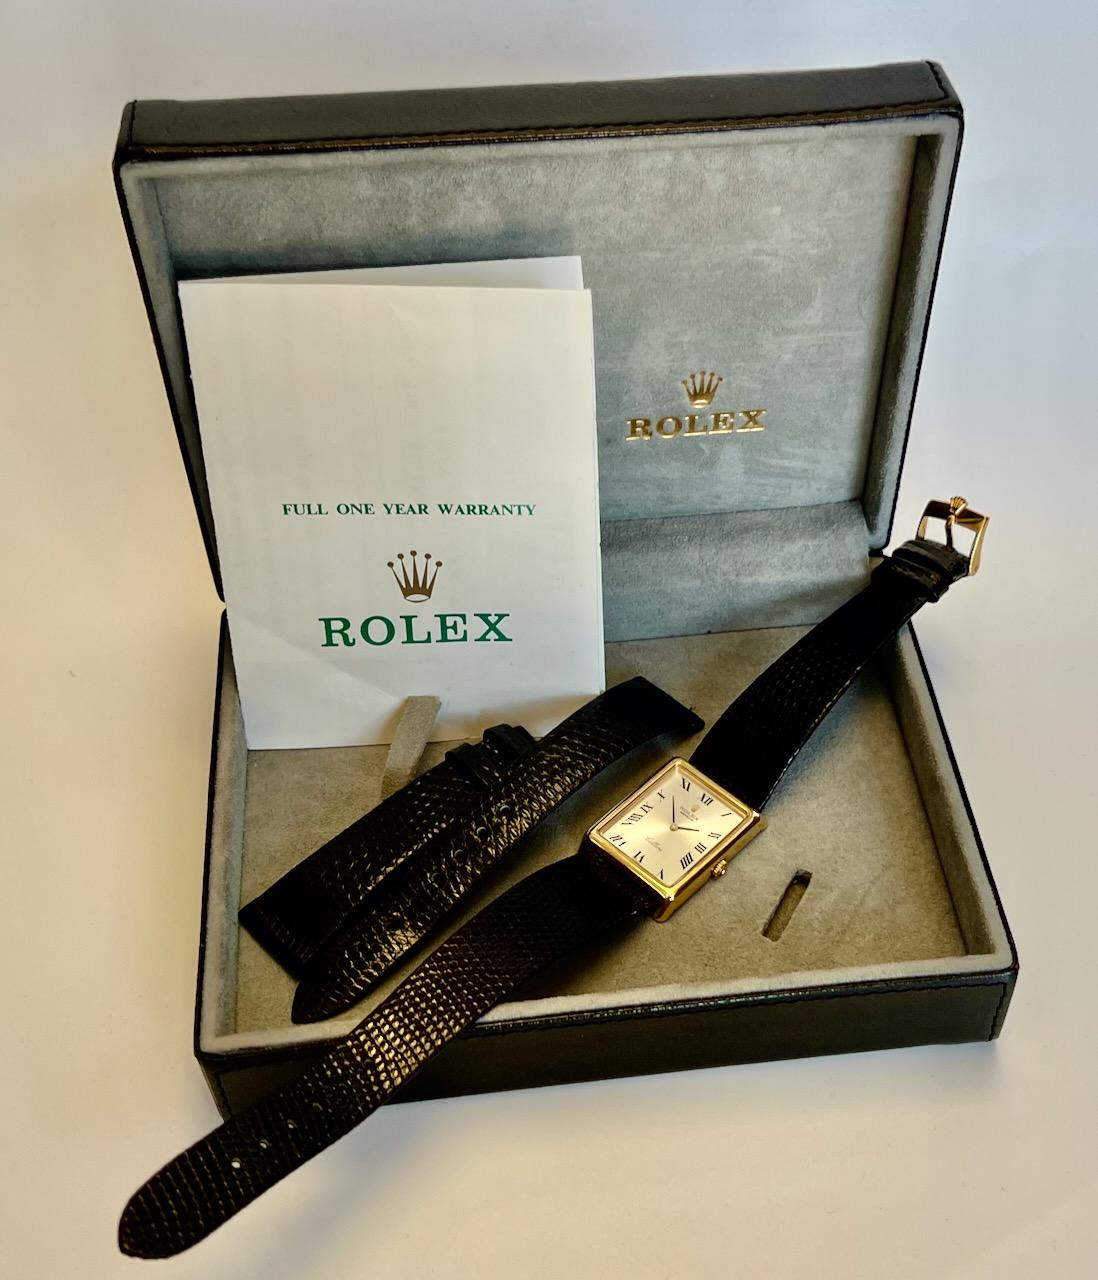 Brand: Rolex
Model Name:	Rolex Cellini Vintage 18k Yellow Gold 4105
Model Number: 4105
Original Box and Papers
Extra Leather Straps - Shorter Size
Gender: Men's
Movement: Original Rolex manually wind movement
Case: Original Rolex 18k yellow gold